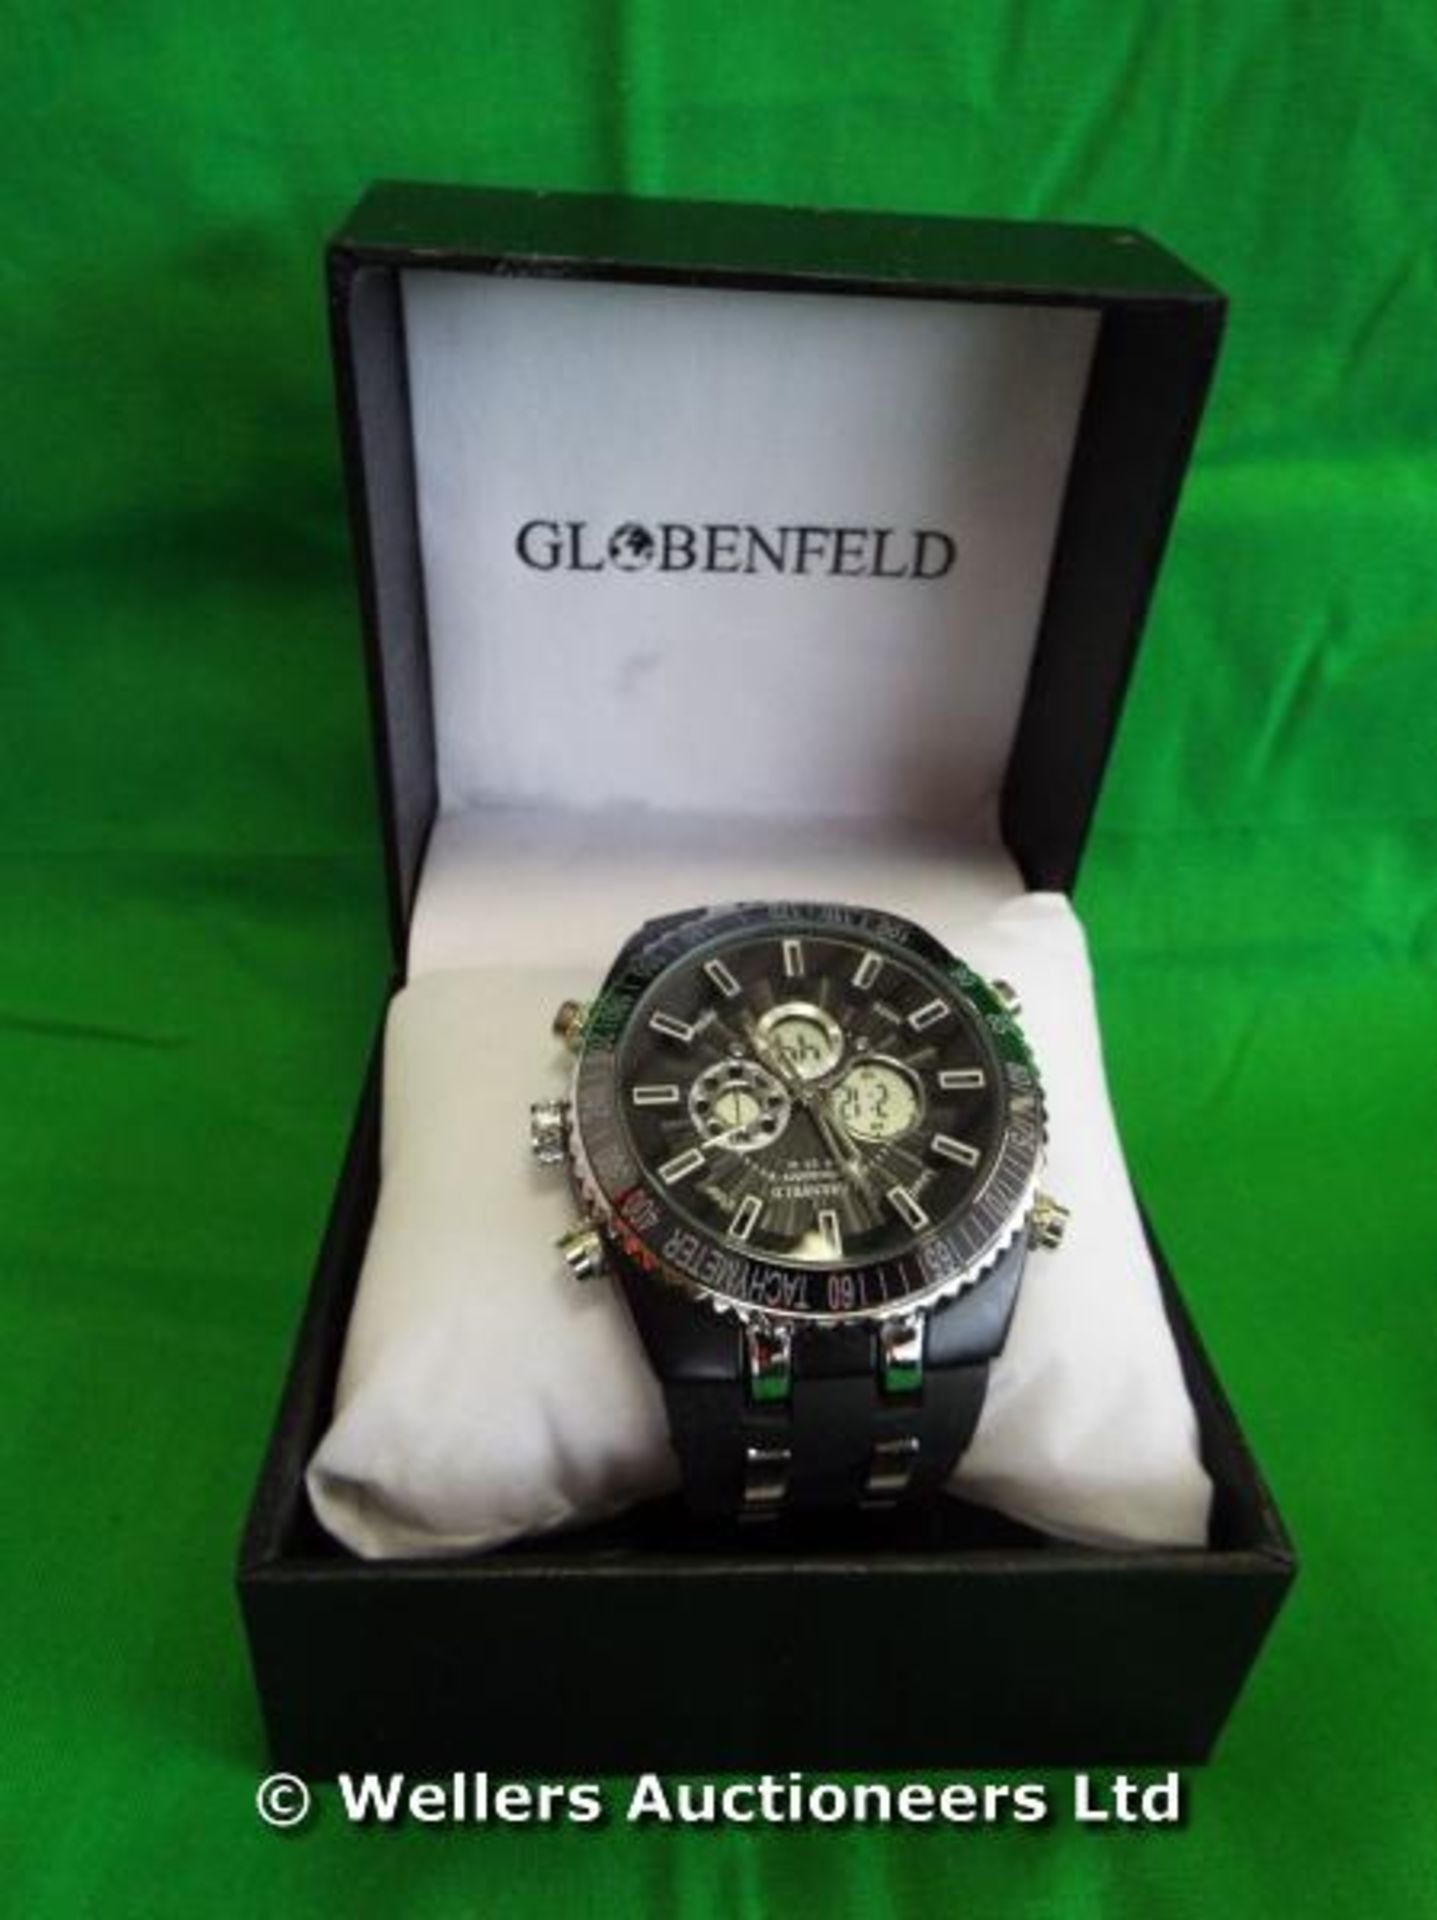 *GLOBENFIELD JETMASTER CIRCULAR DIAL RUBBER STRAP WATCH / GRADE: NEW / BOXED (DC2) {#1145 [